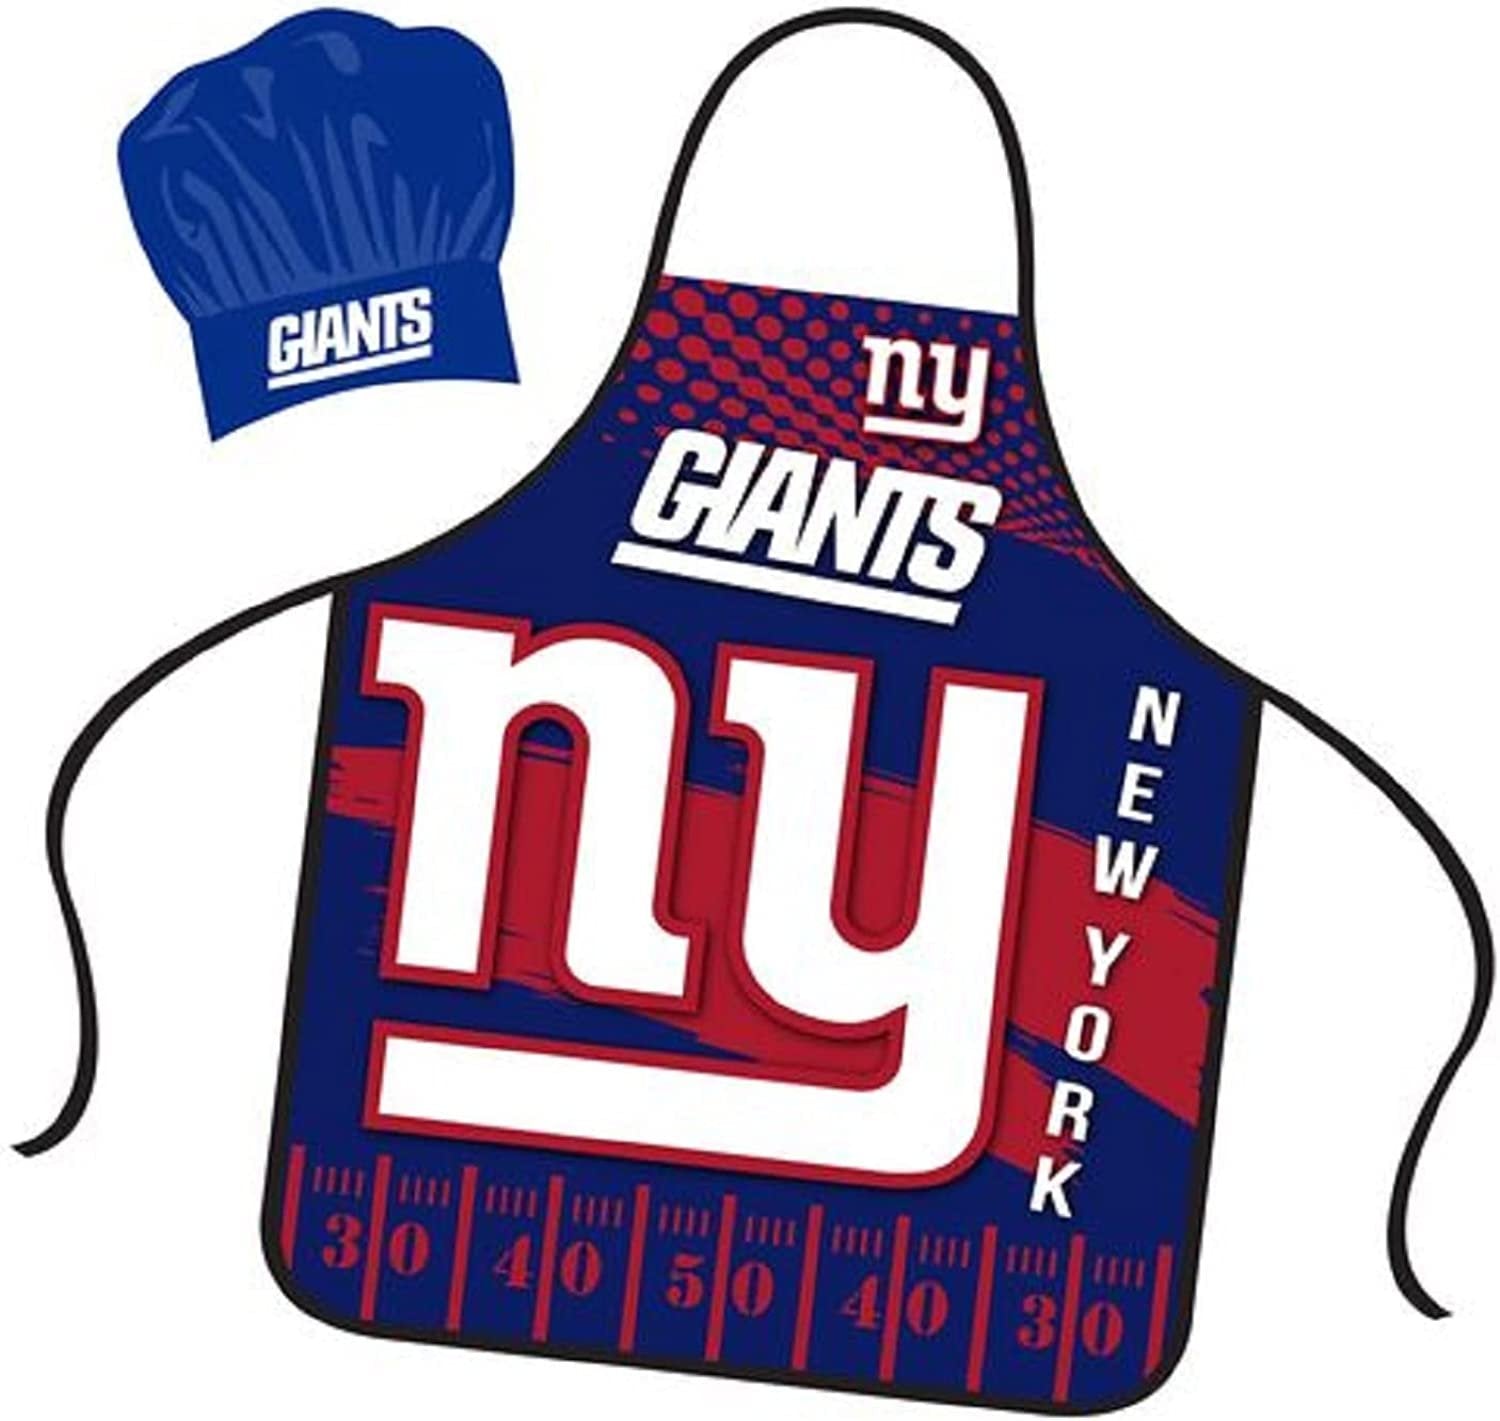 New York Giants Apron Chef Hat Set Full Color Universal Size Tie Back Grilling Tailgate BBQ Cooking Host